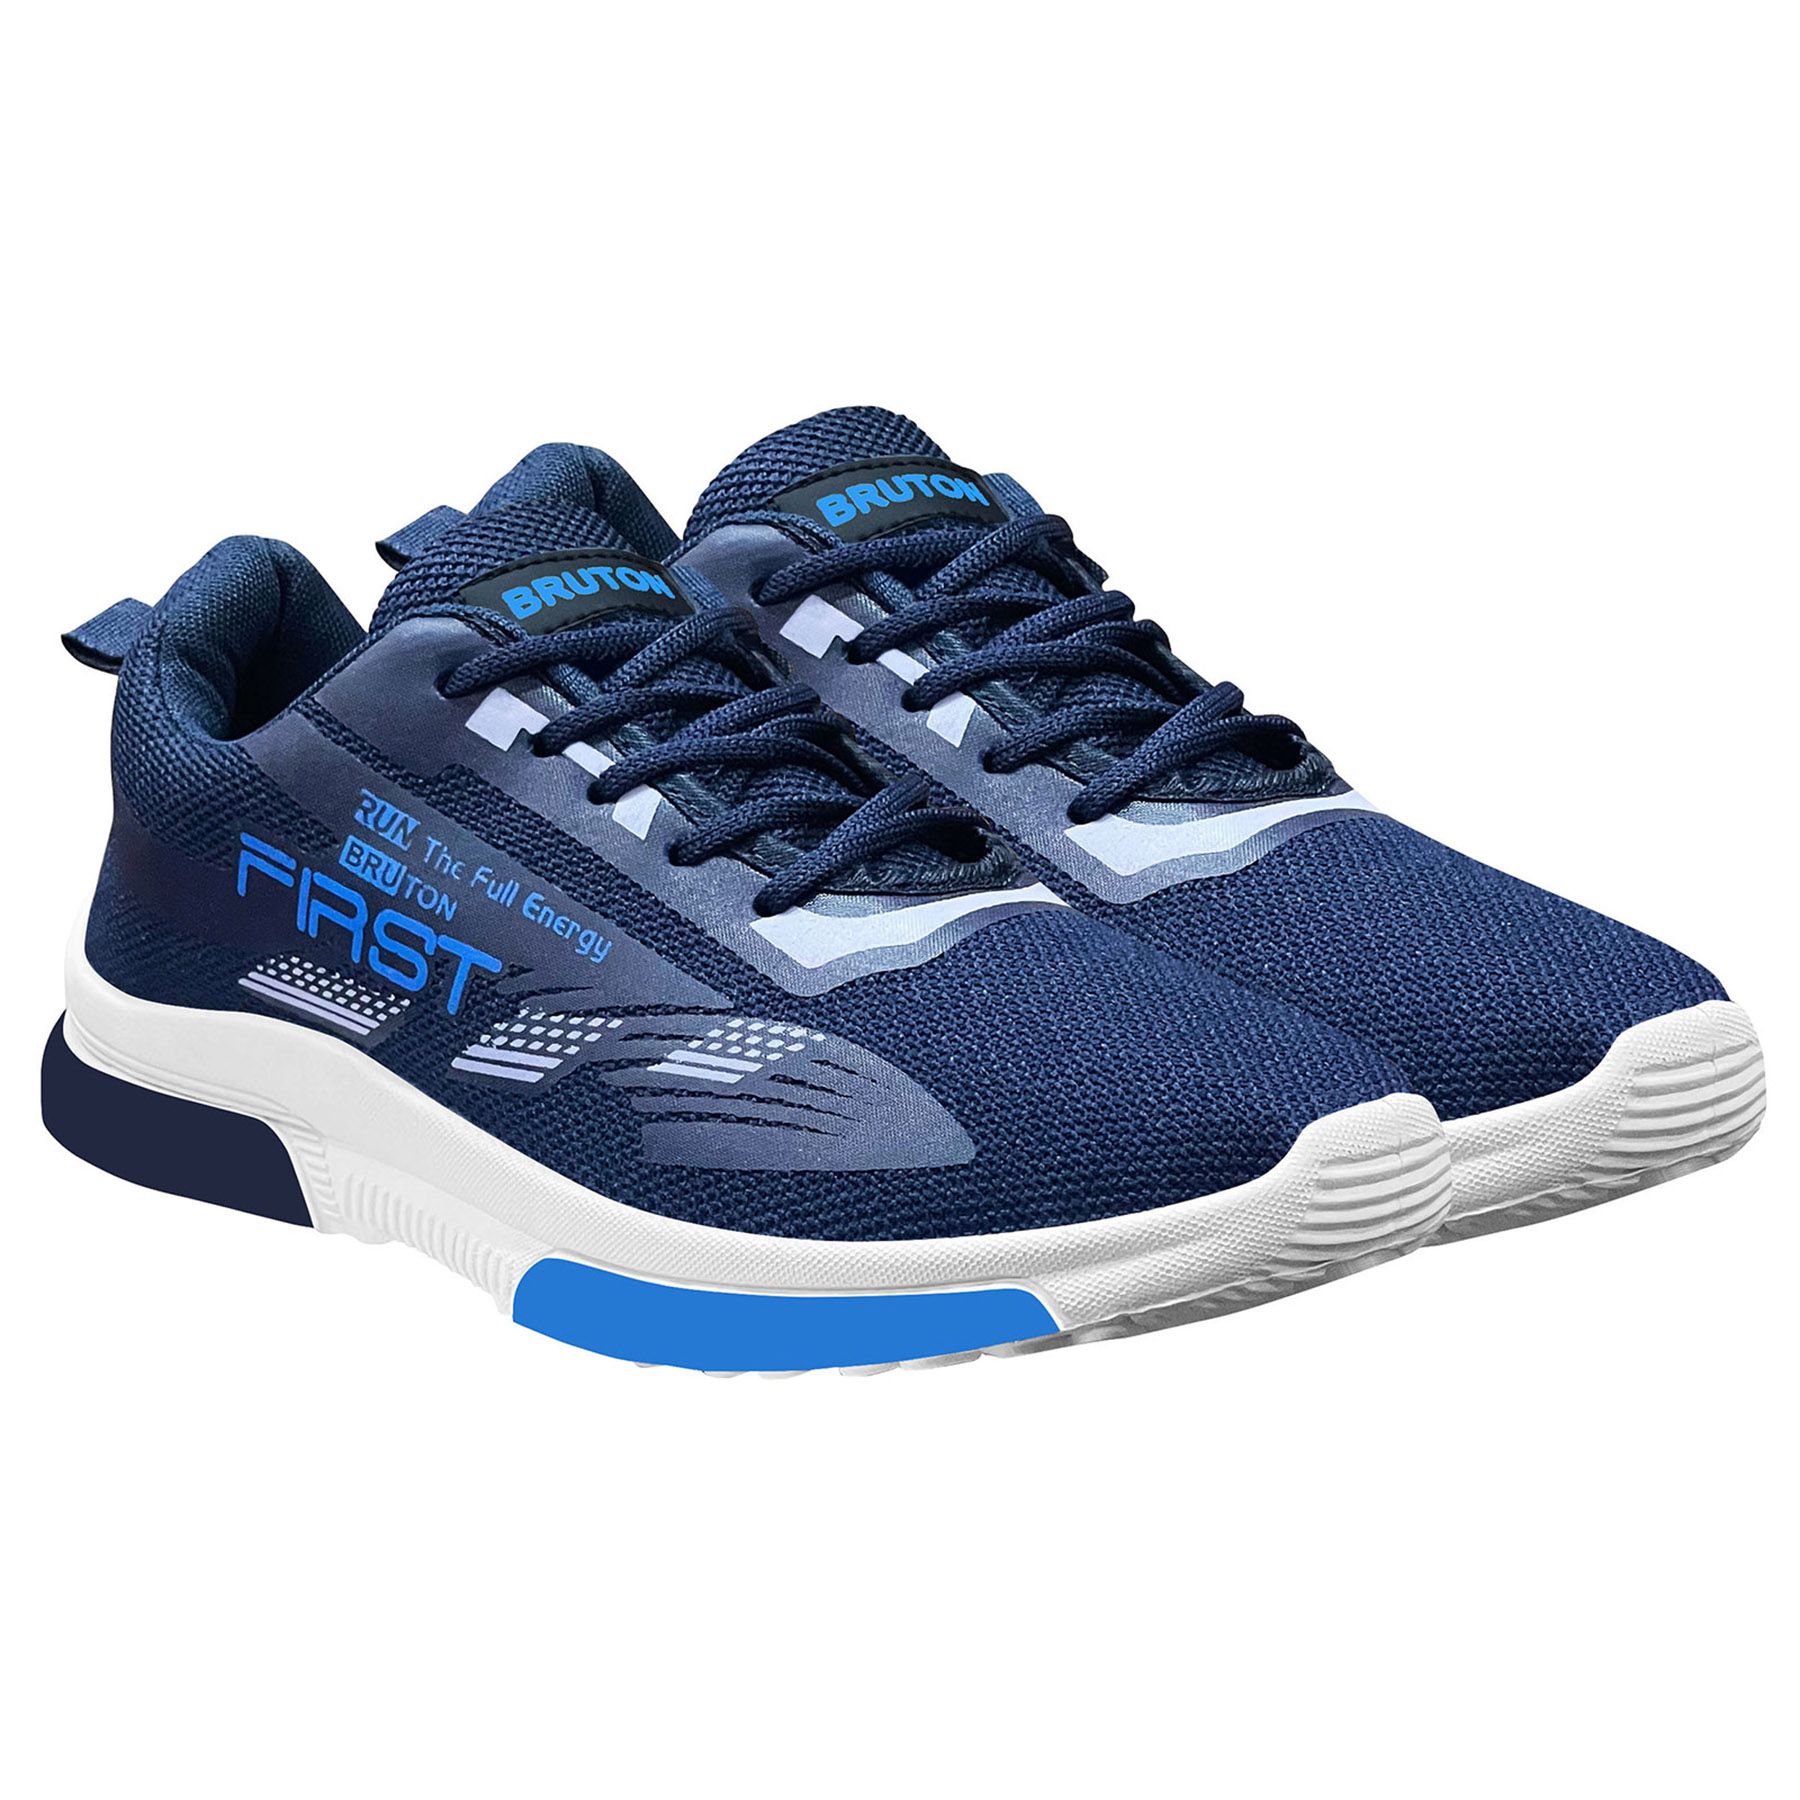     			Bruton Sneakers Casual Shoes for Men Blue Men's Lifestyle